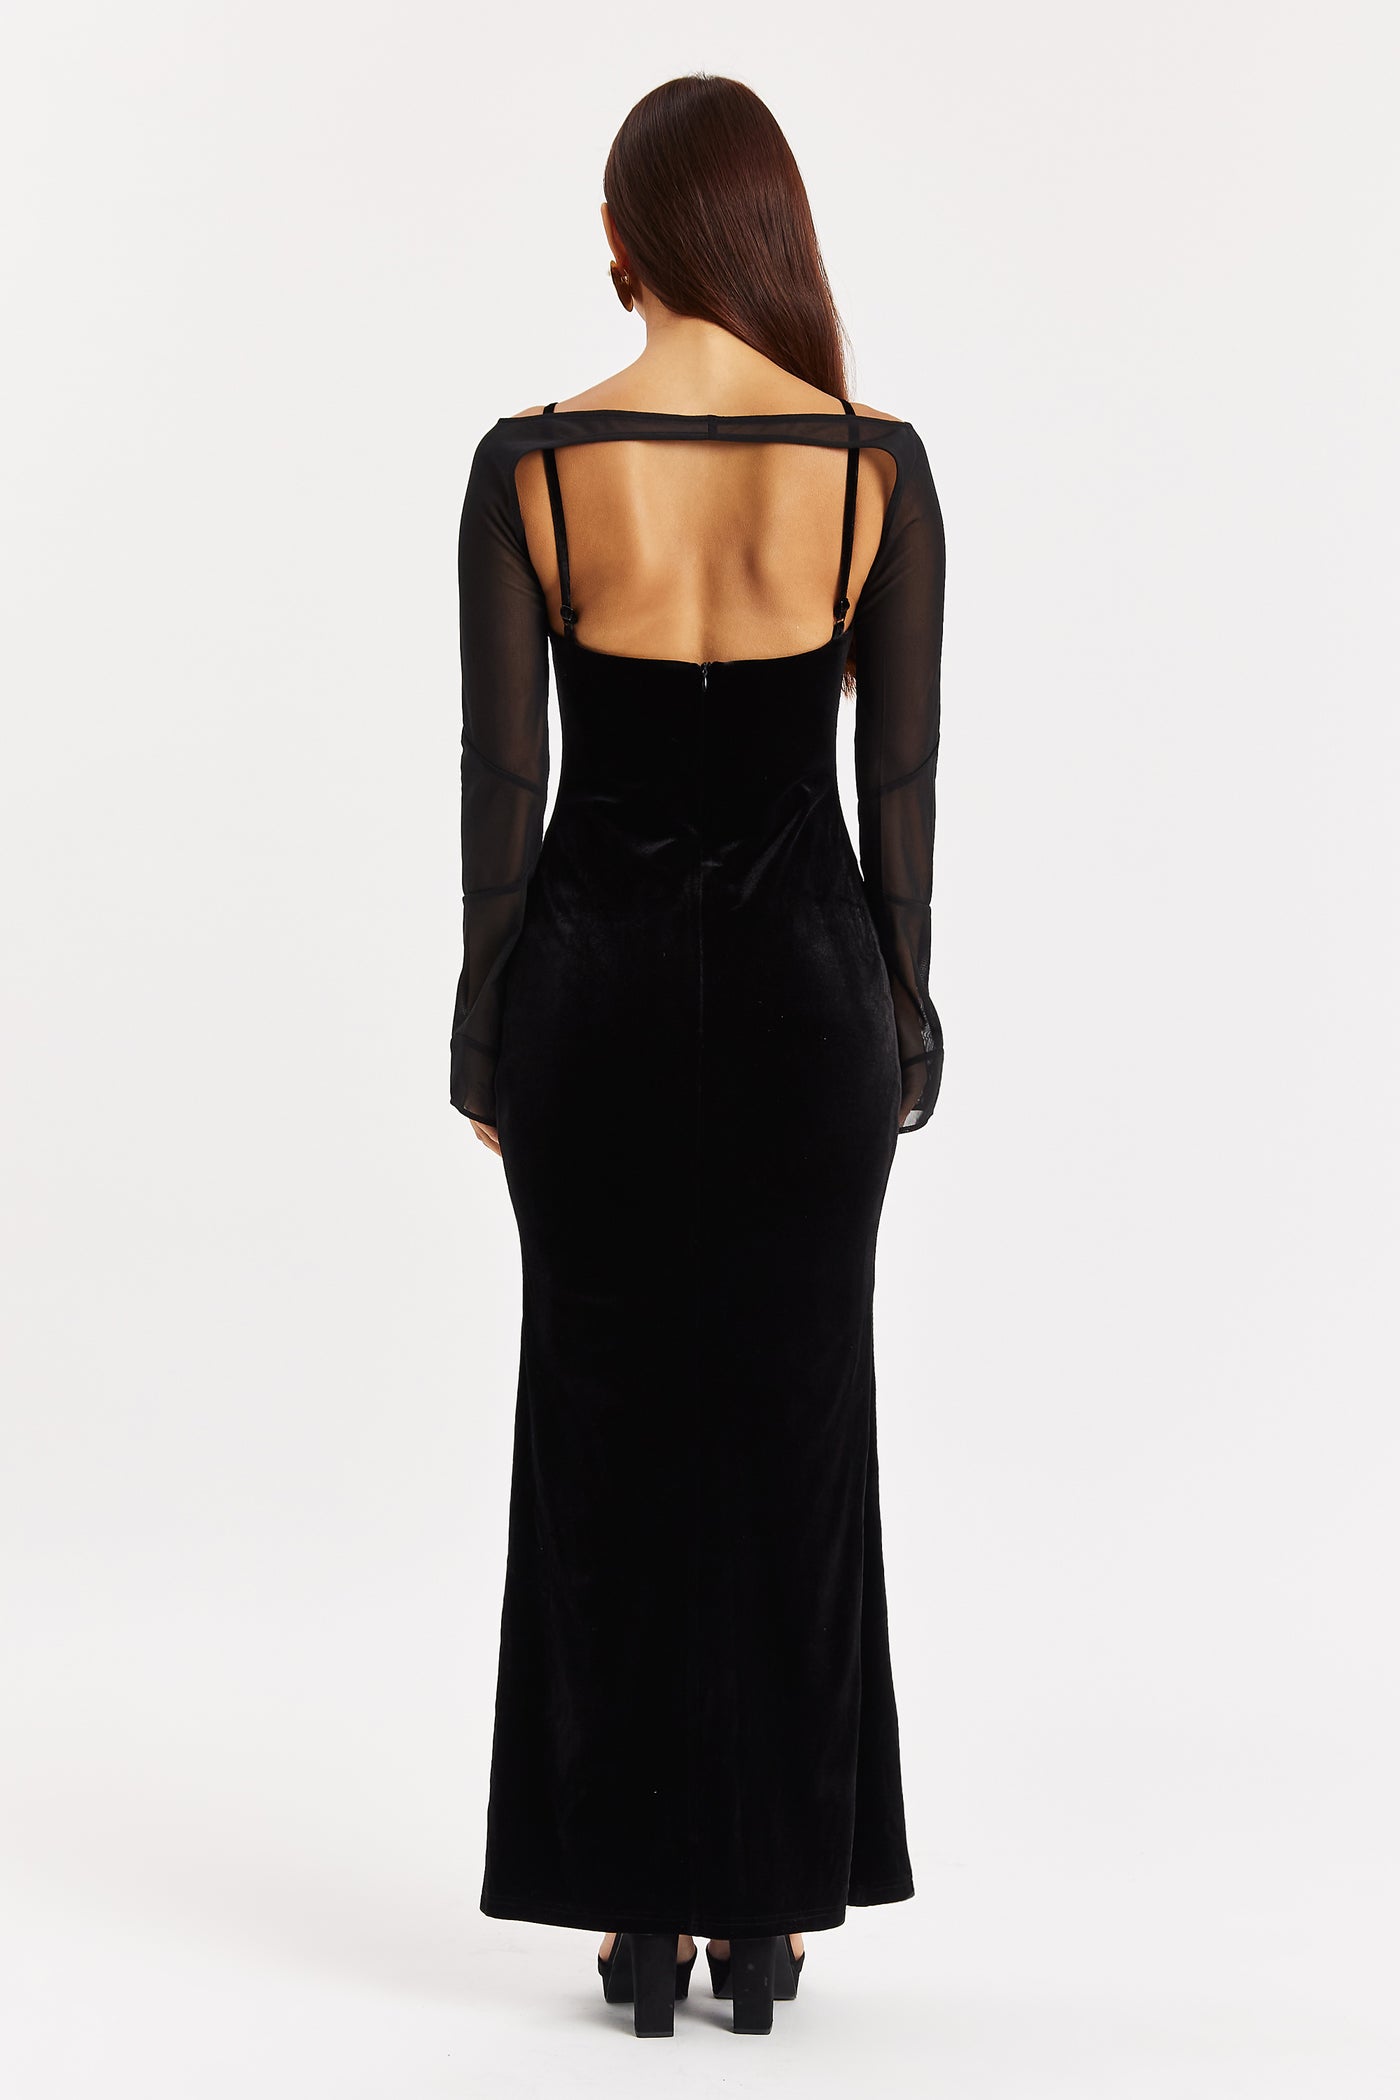 Panther Velvet Gina Gown